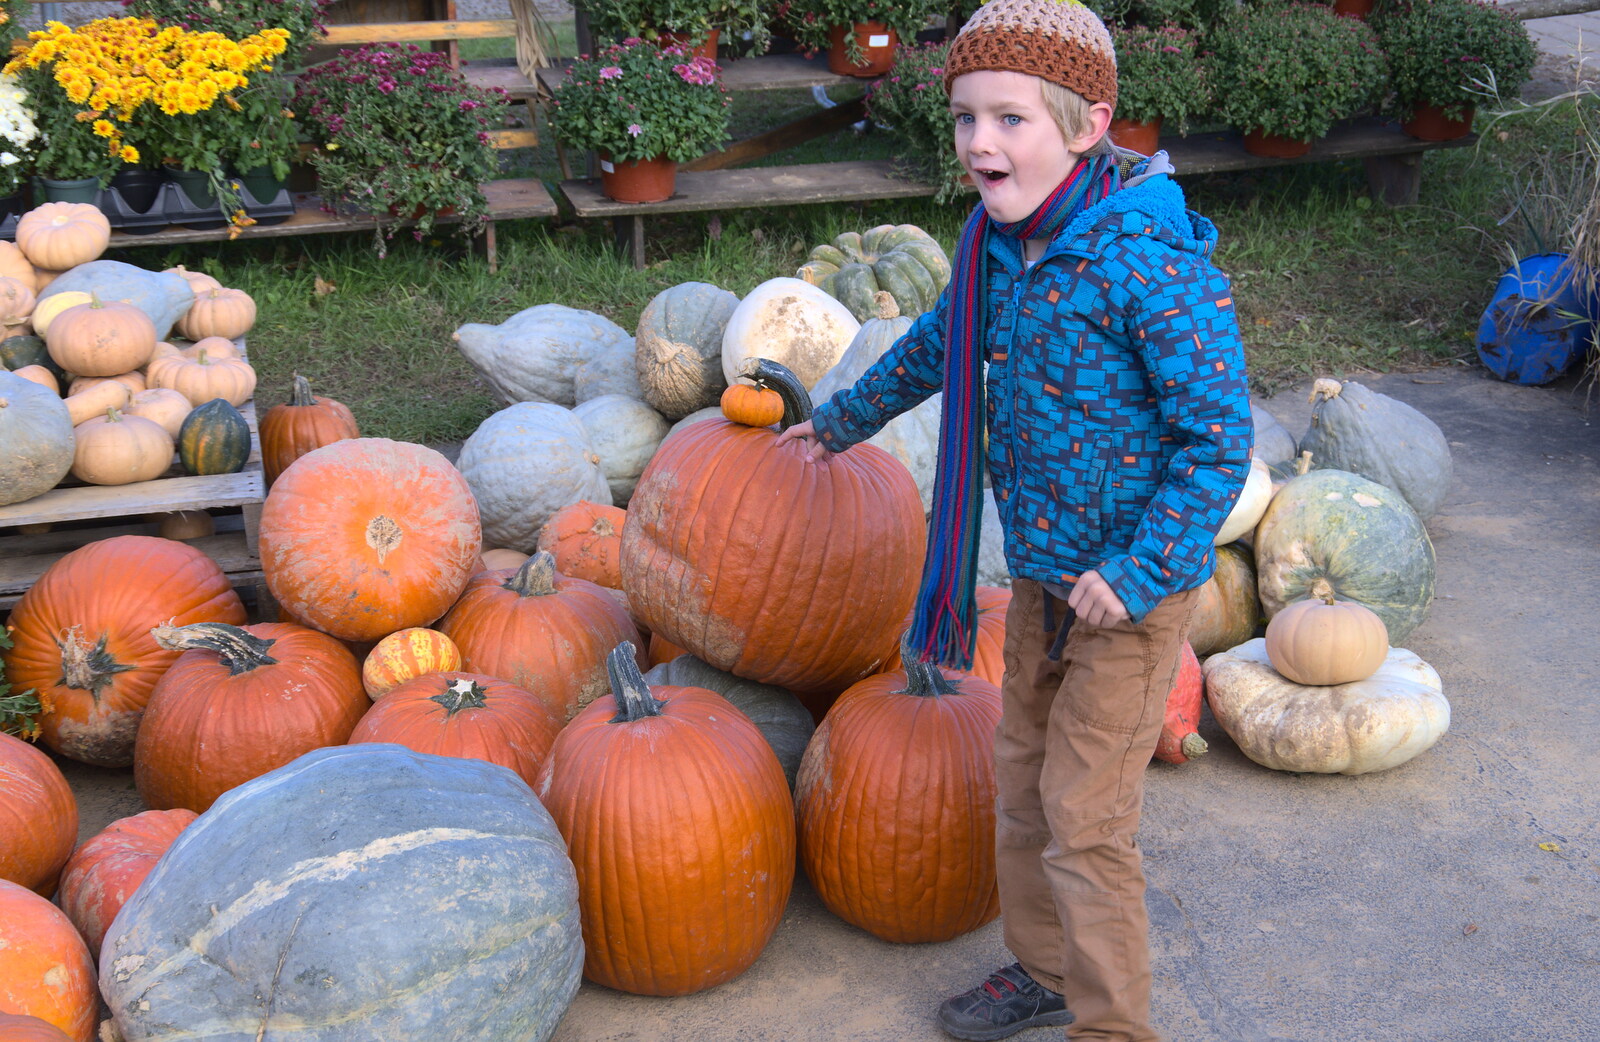 Harry's amazed by a pumpkin from Pumpkin Picking at Alstede Farm, Chester, Morris County, New Jersey - 24th October 2018